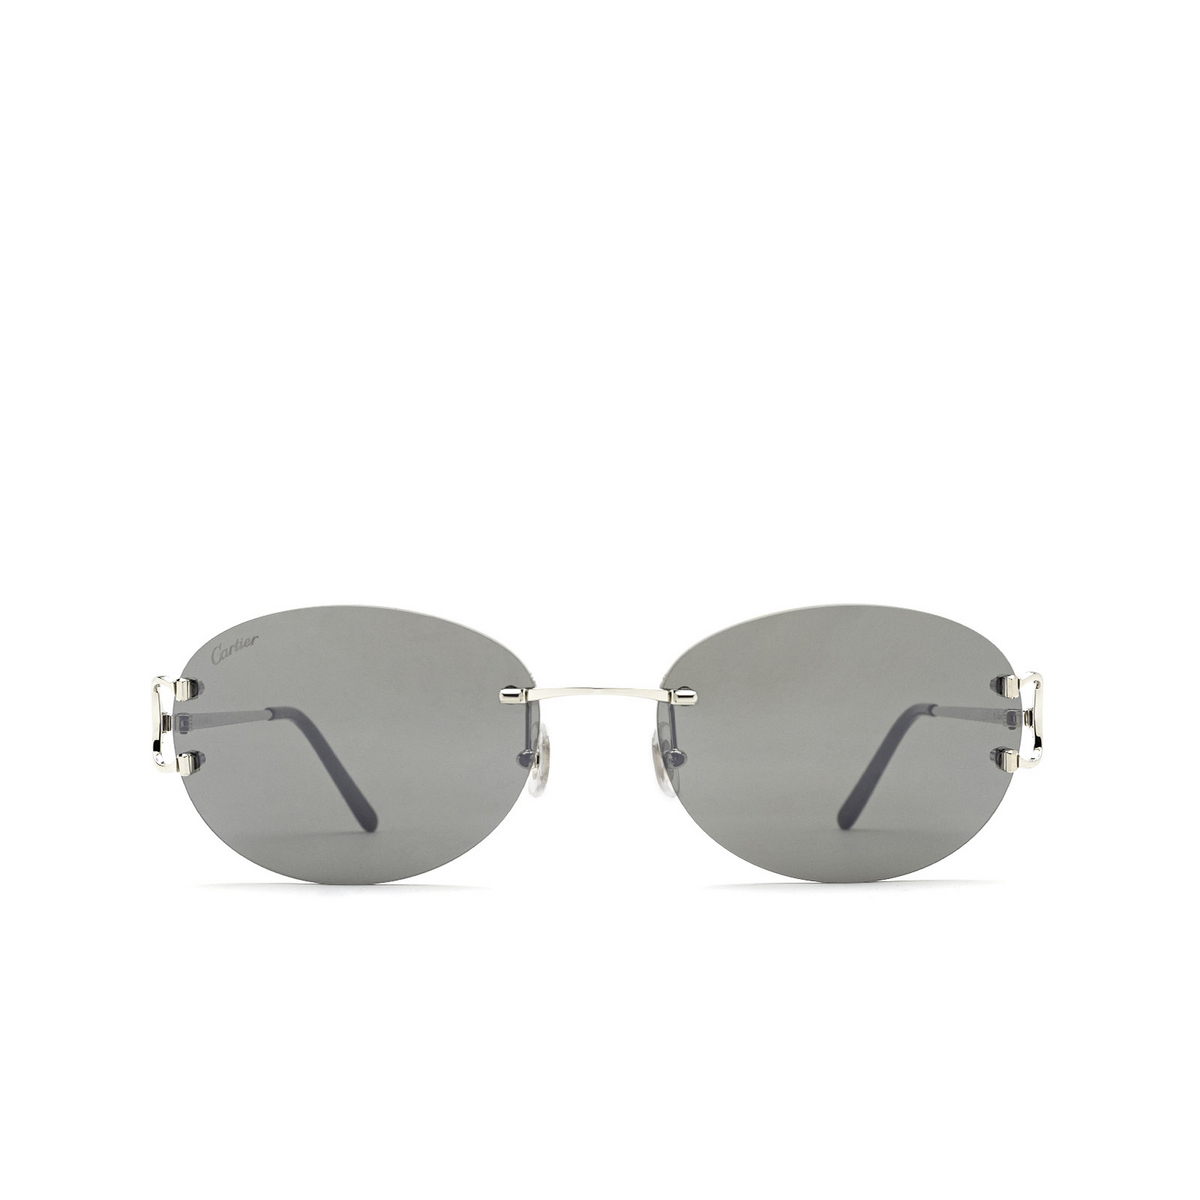 Cartier® Oval Sunglasses: CT0029RS color Silver 001 - front view.